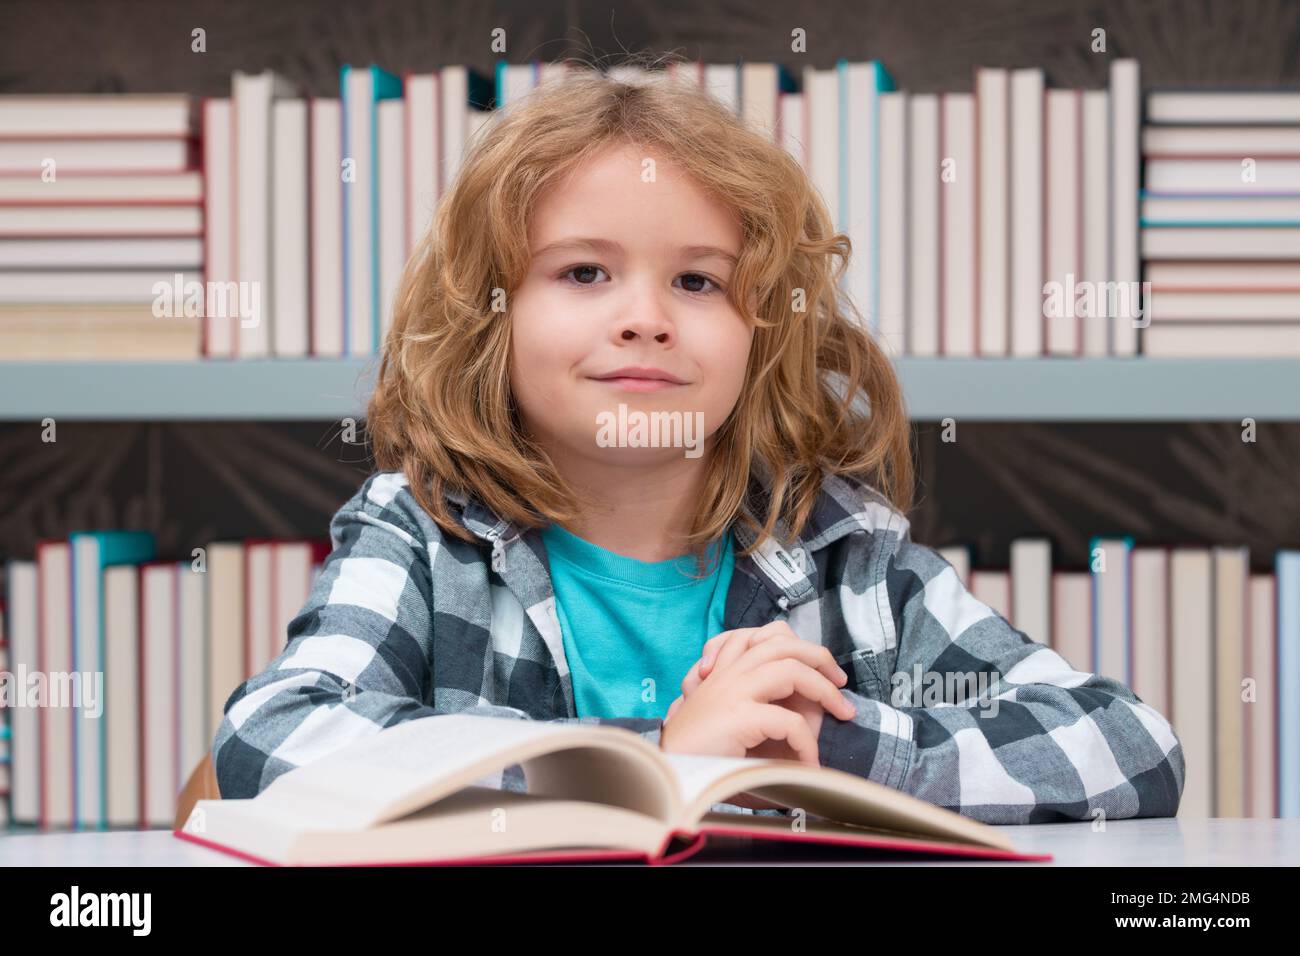 Child reading book in a book store or library, Stock Photo